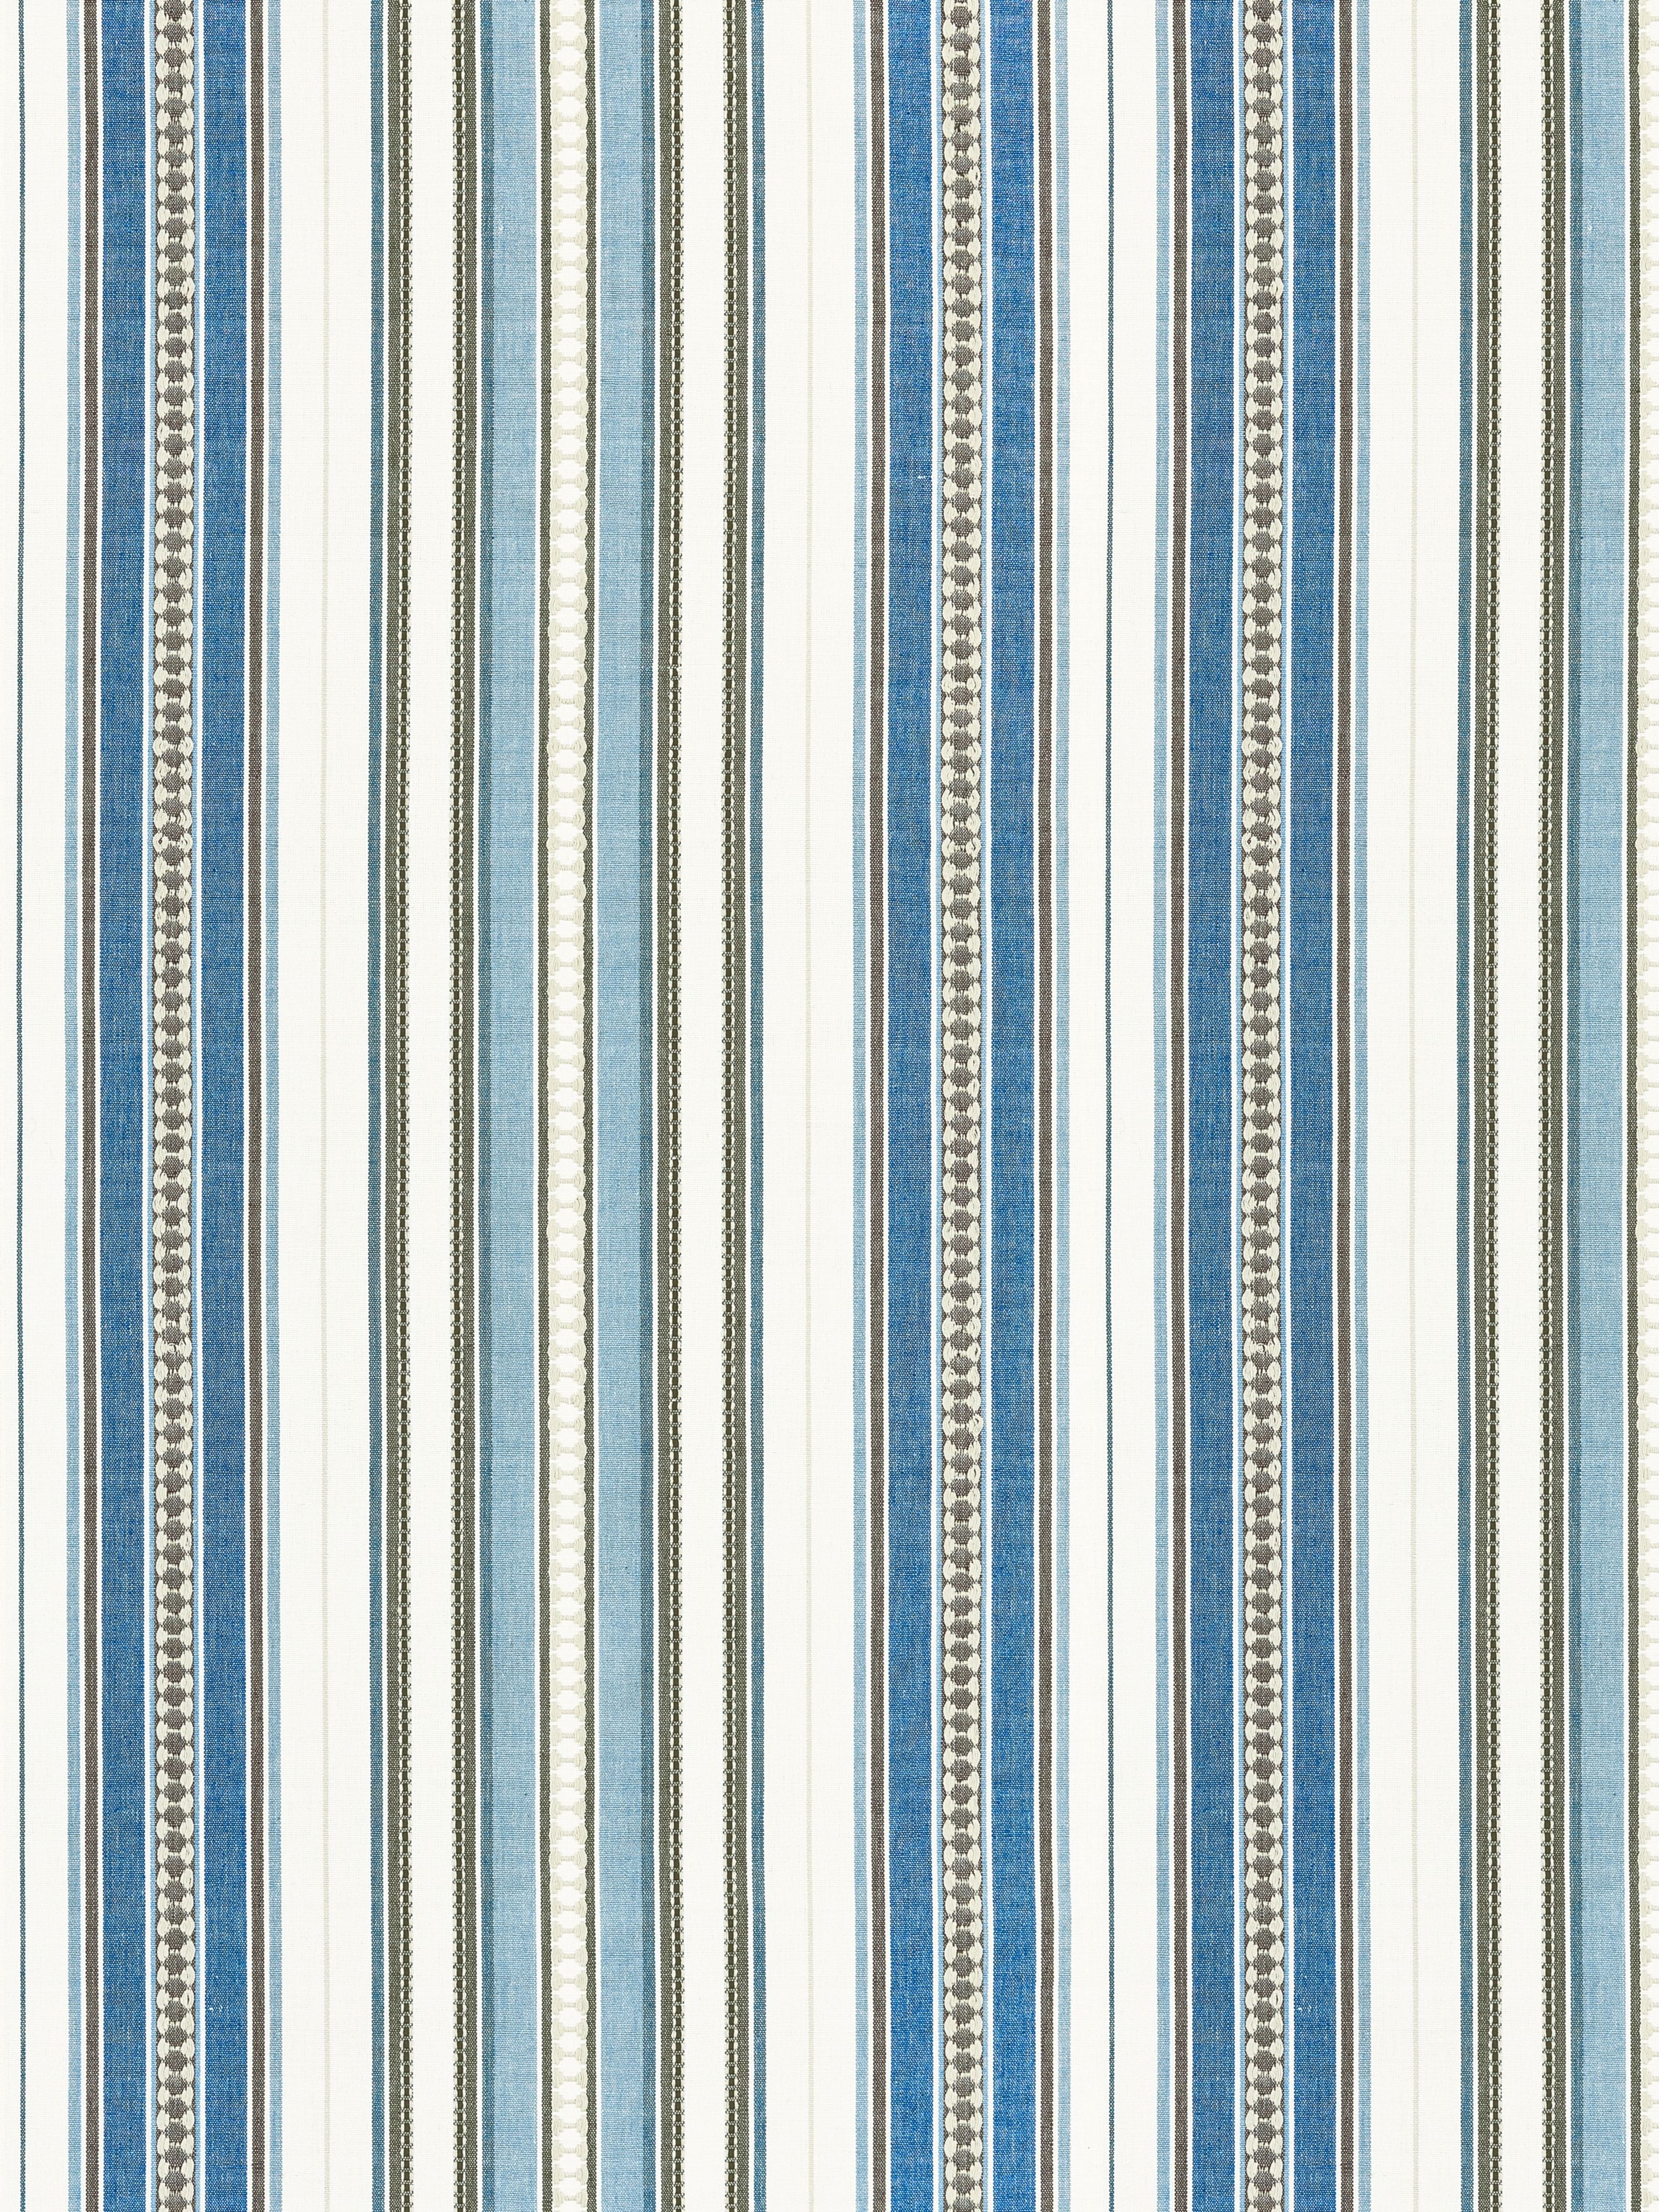 Nile Stripe fabric in blue jay color - pattern number SC 000227253 - by Scalamandre in the Scalamandre Fabrics Book 1 collection